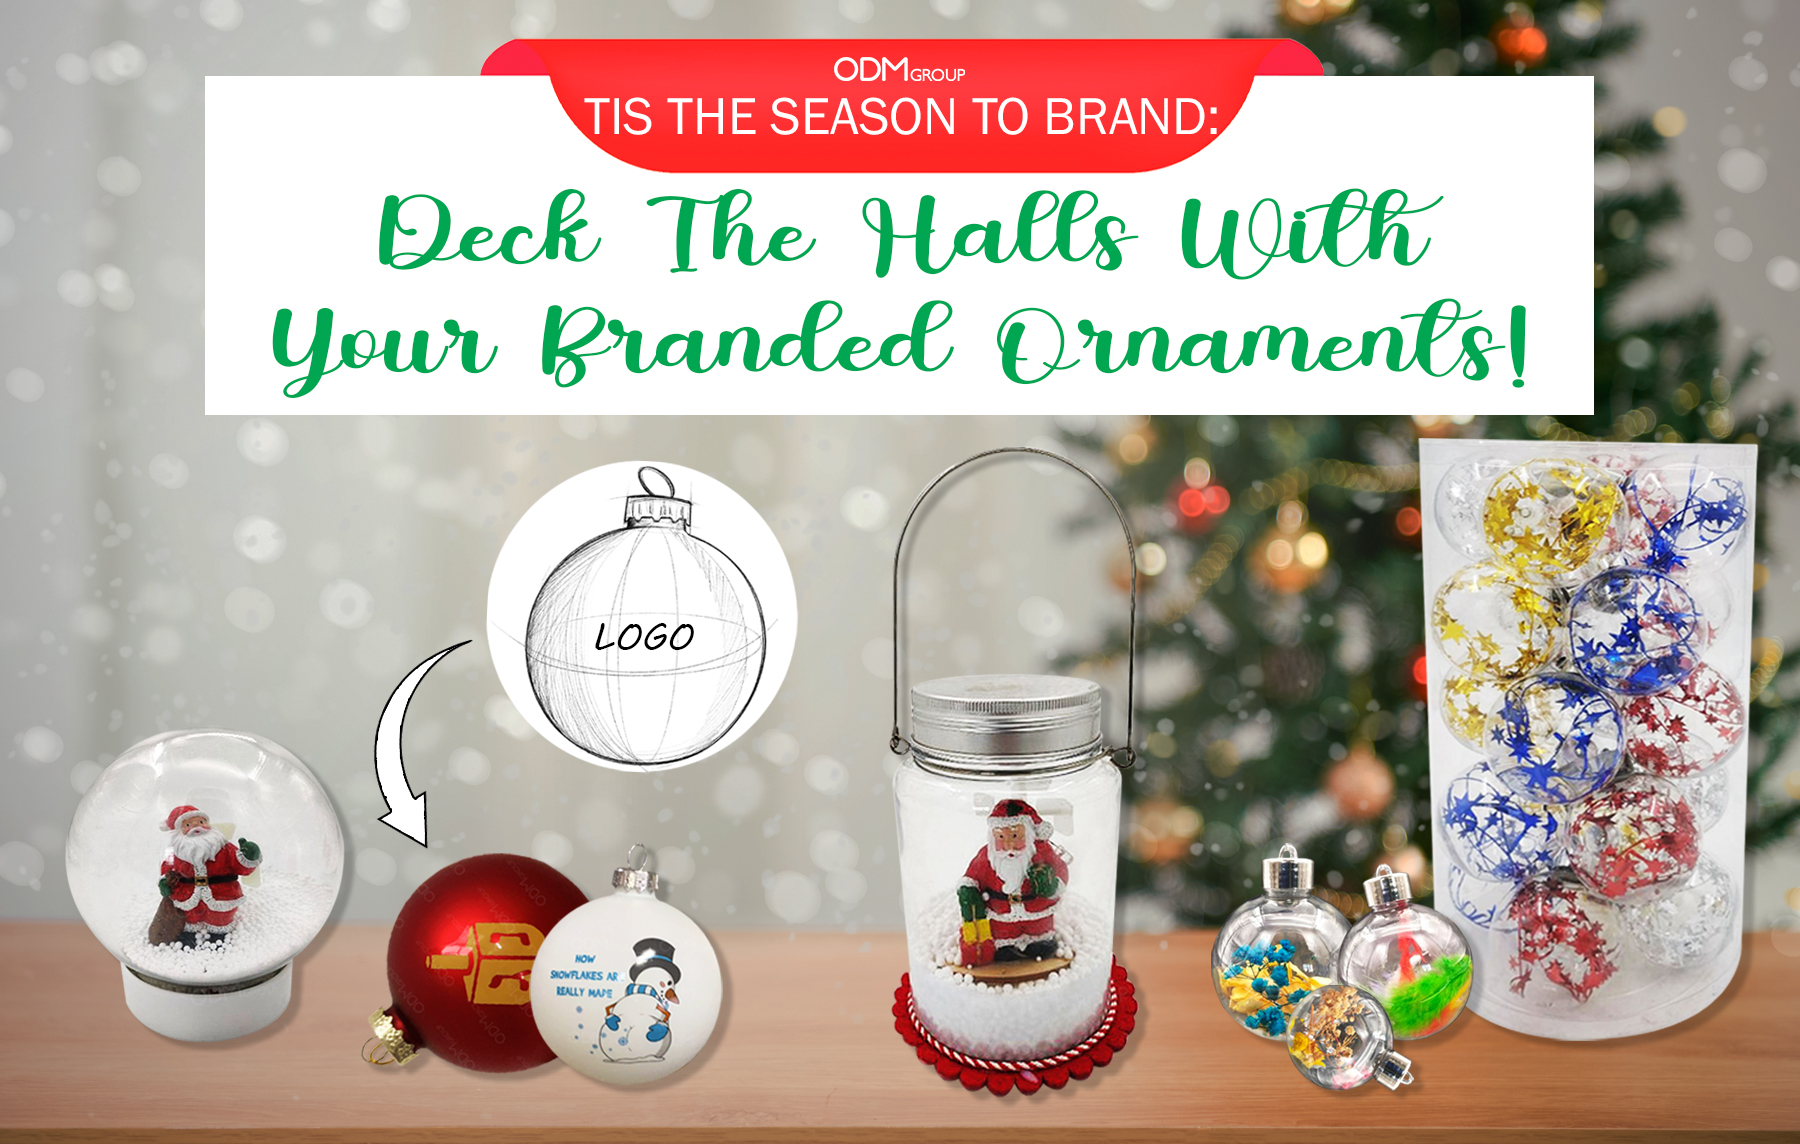 Assortment of branded Christmas ornaments for corporate Christmas gif ideas.